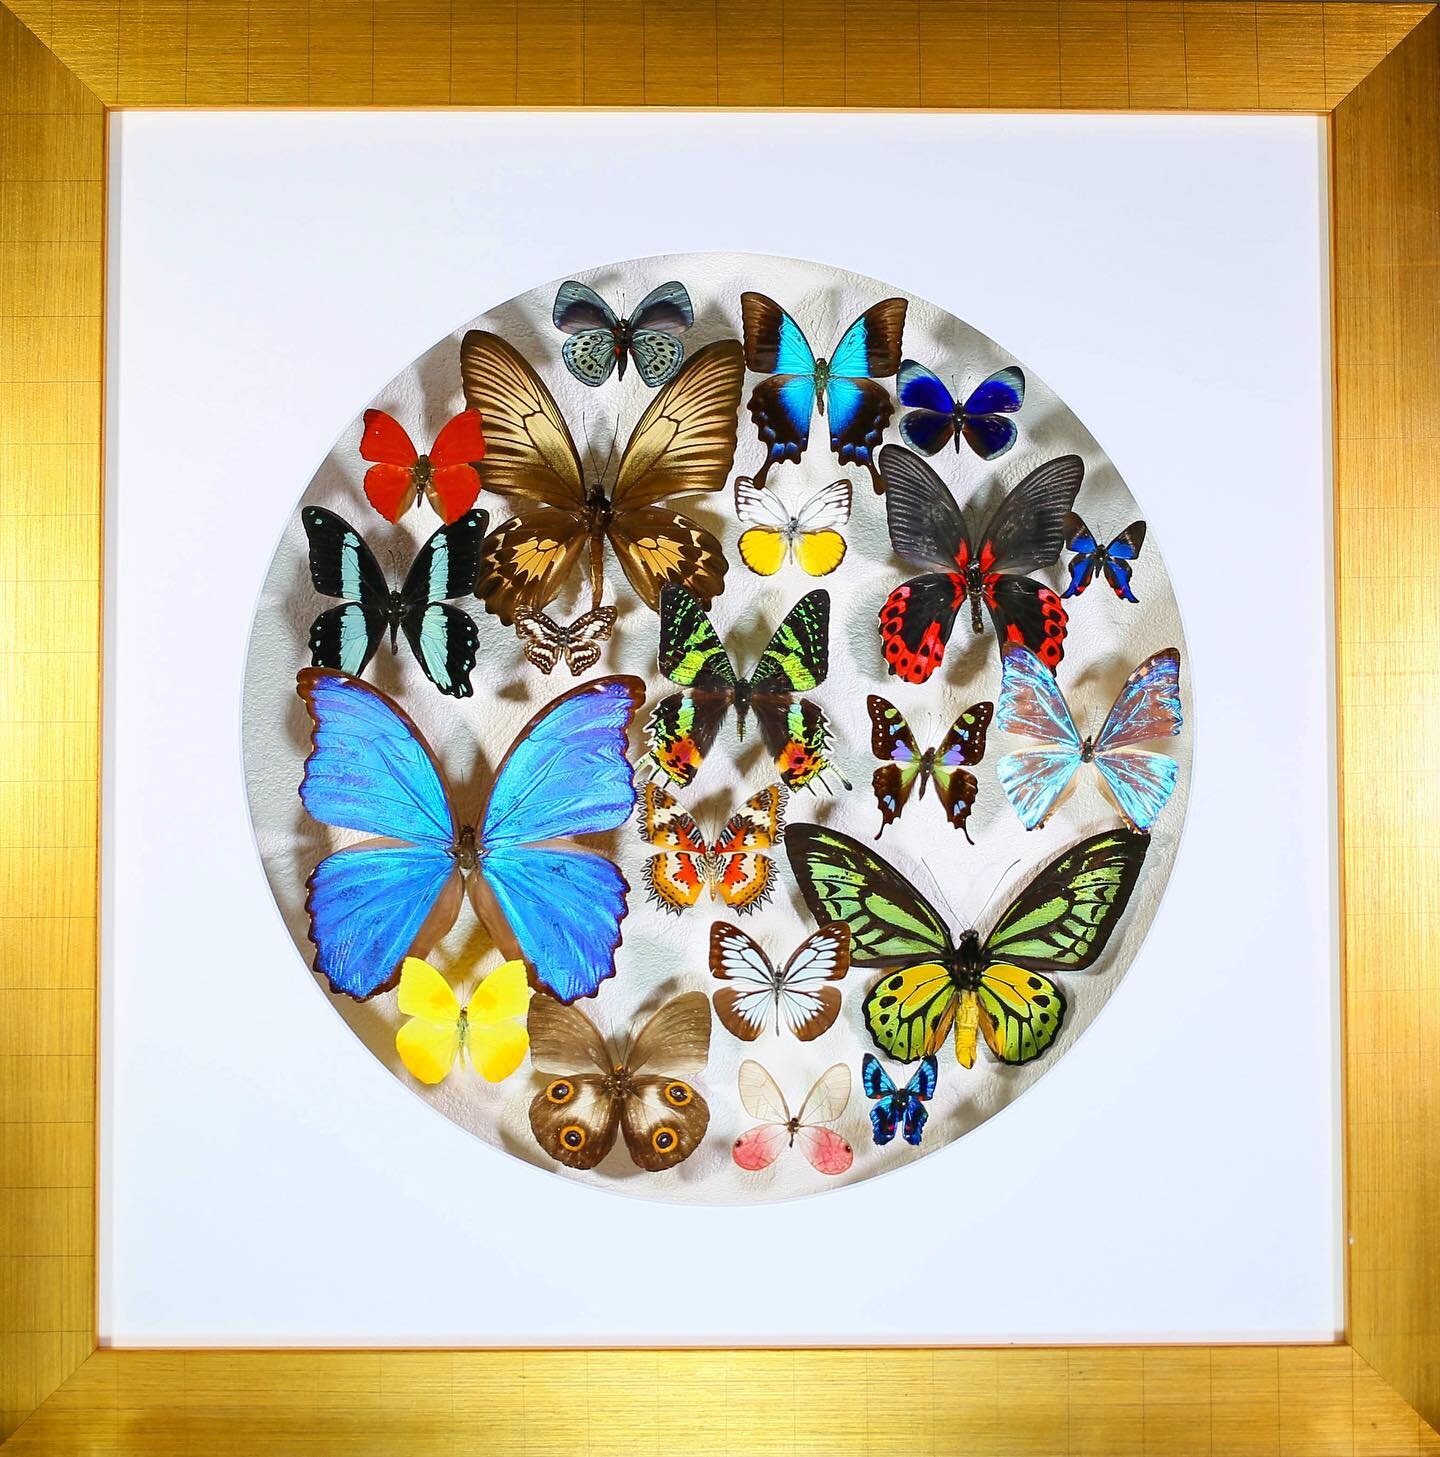 Love this composition, the variety in shapes and color of all these butterflies from around the world is ❤️!! 🦋🦋🦋

#butterfly #butterflies #insects #entomology #moth #bugsofinstagram #inked #butterflytattoo #tattoo #tattooart #crystals #art #witch